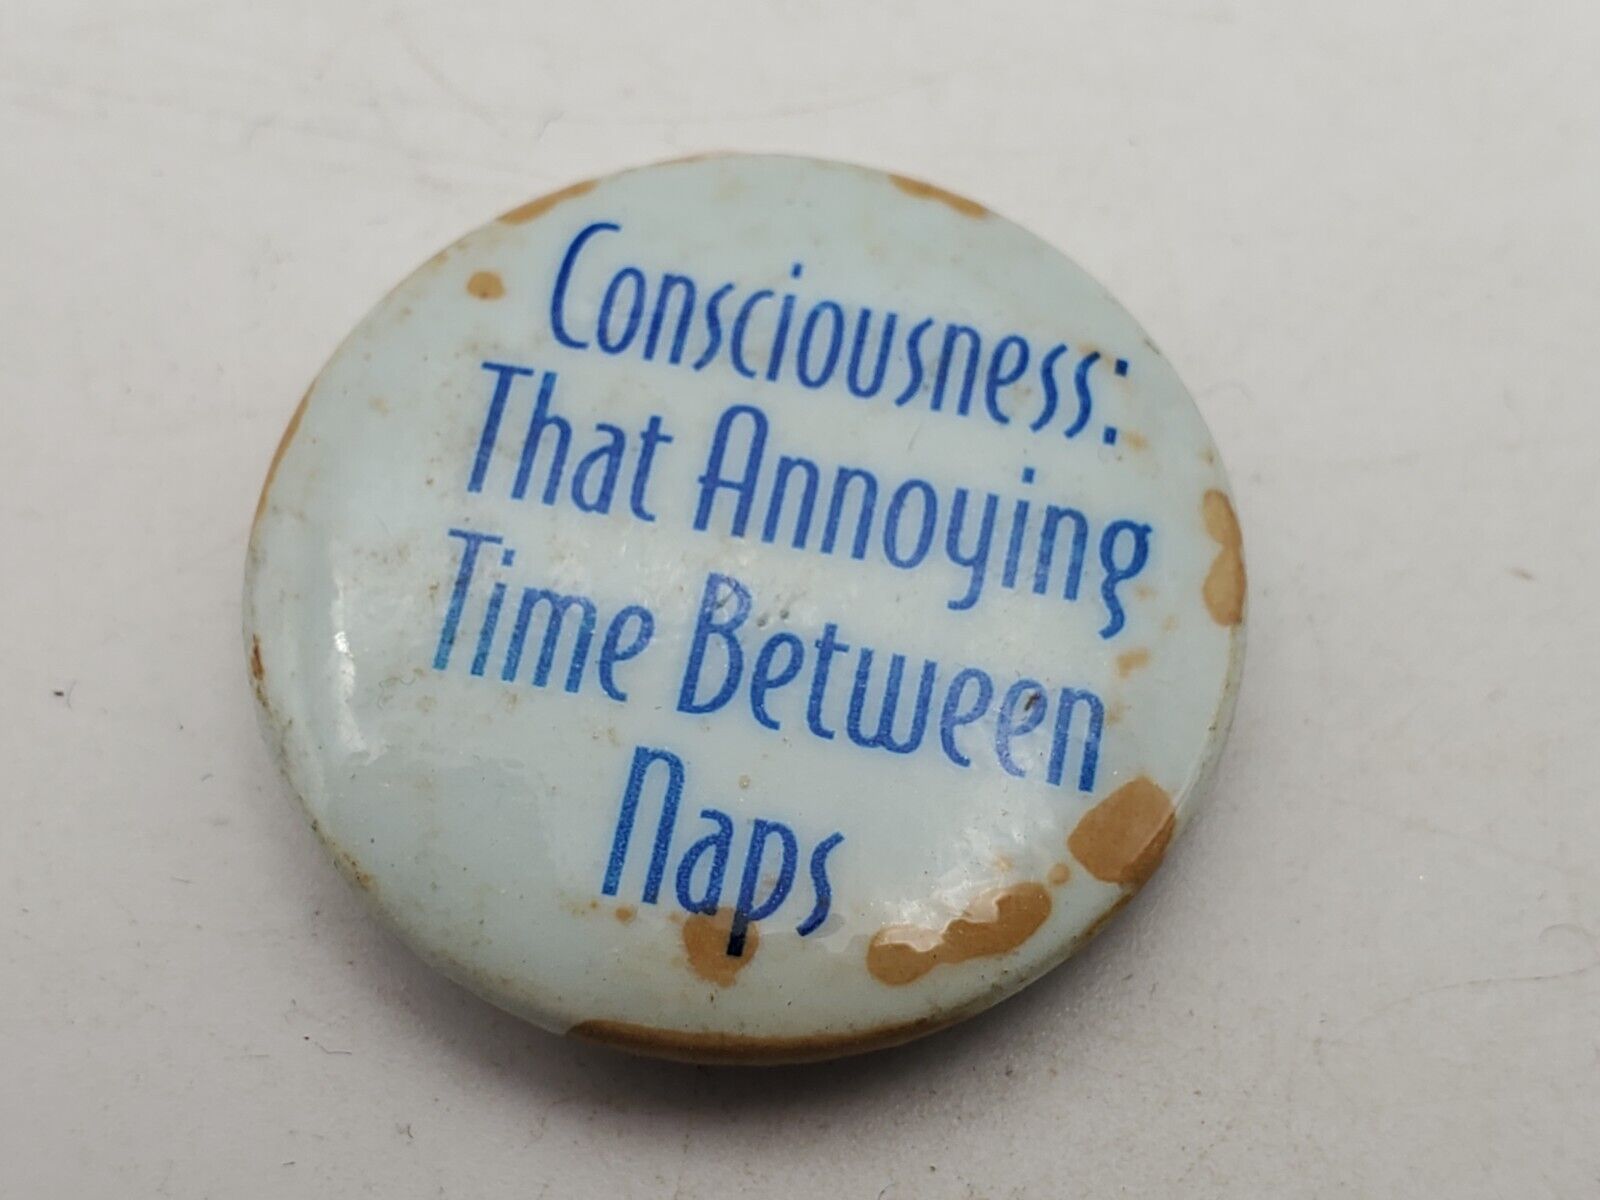 Vtg CONSCIOUSNESS: ANNOYING TIME BETWEEN NAPS Badge Button PIn Pinback As Is S1